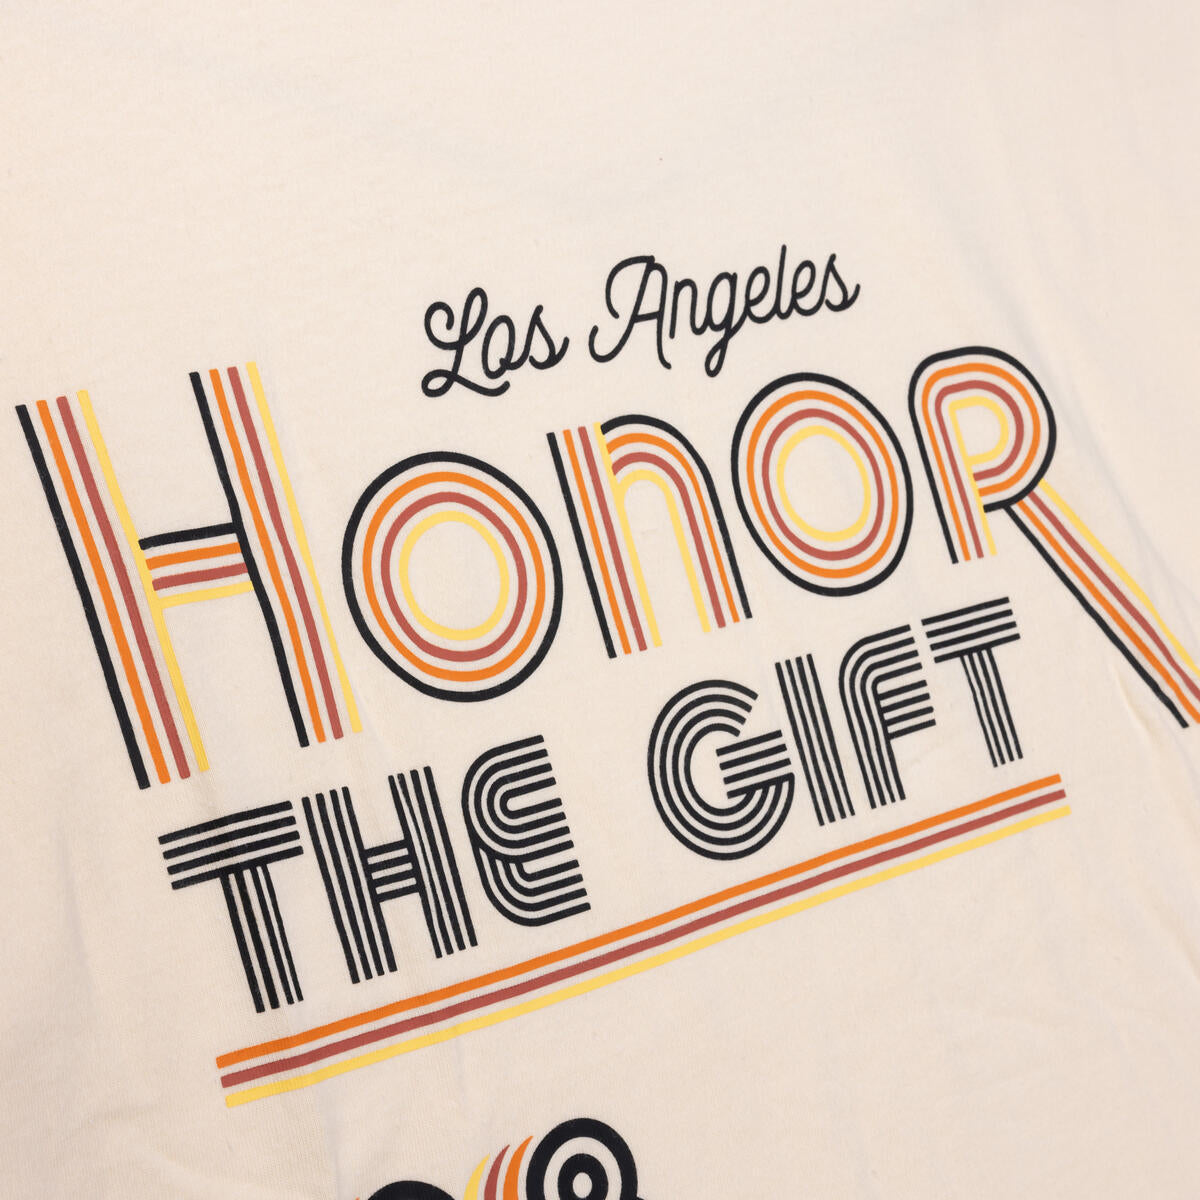 Honor The Gift A-spring Retro Honor Tee- TAN